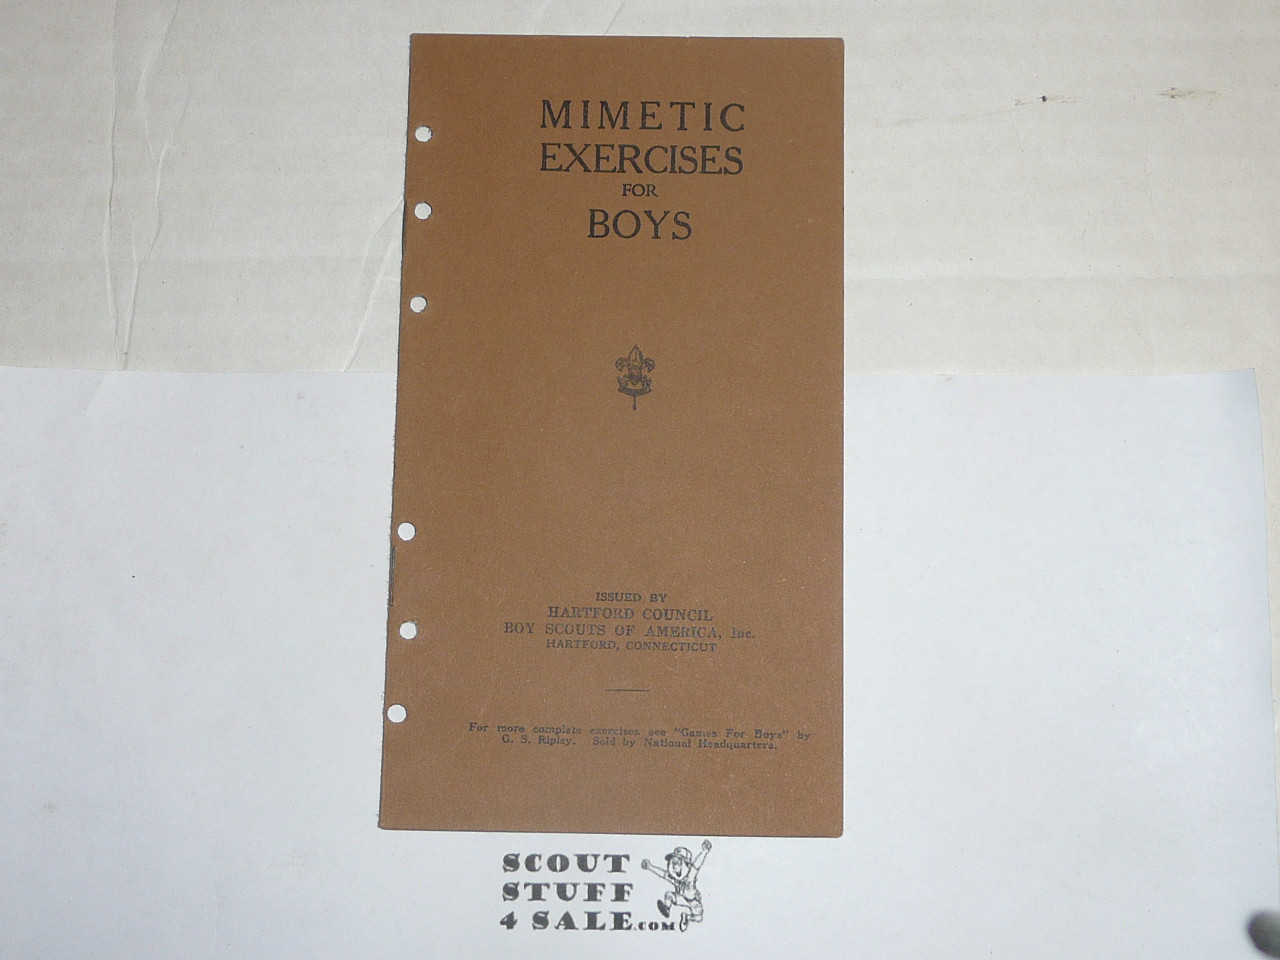 Lefax Boy Scout Fieldbook Insert, Mimetic Exercises for Boys, By Hartford Council